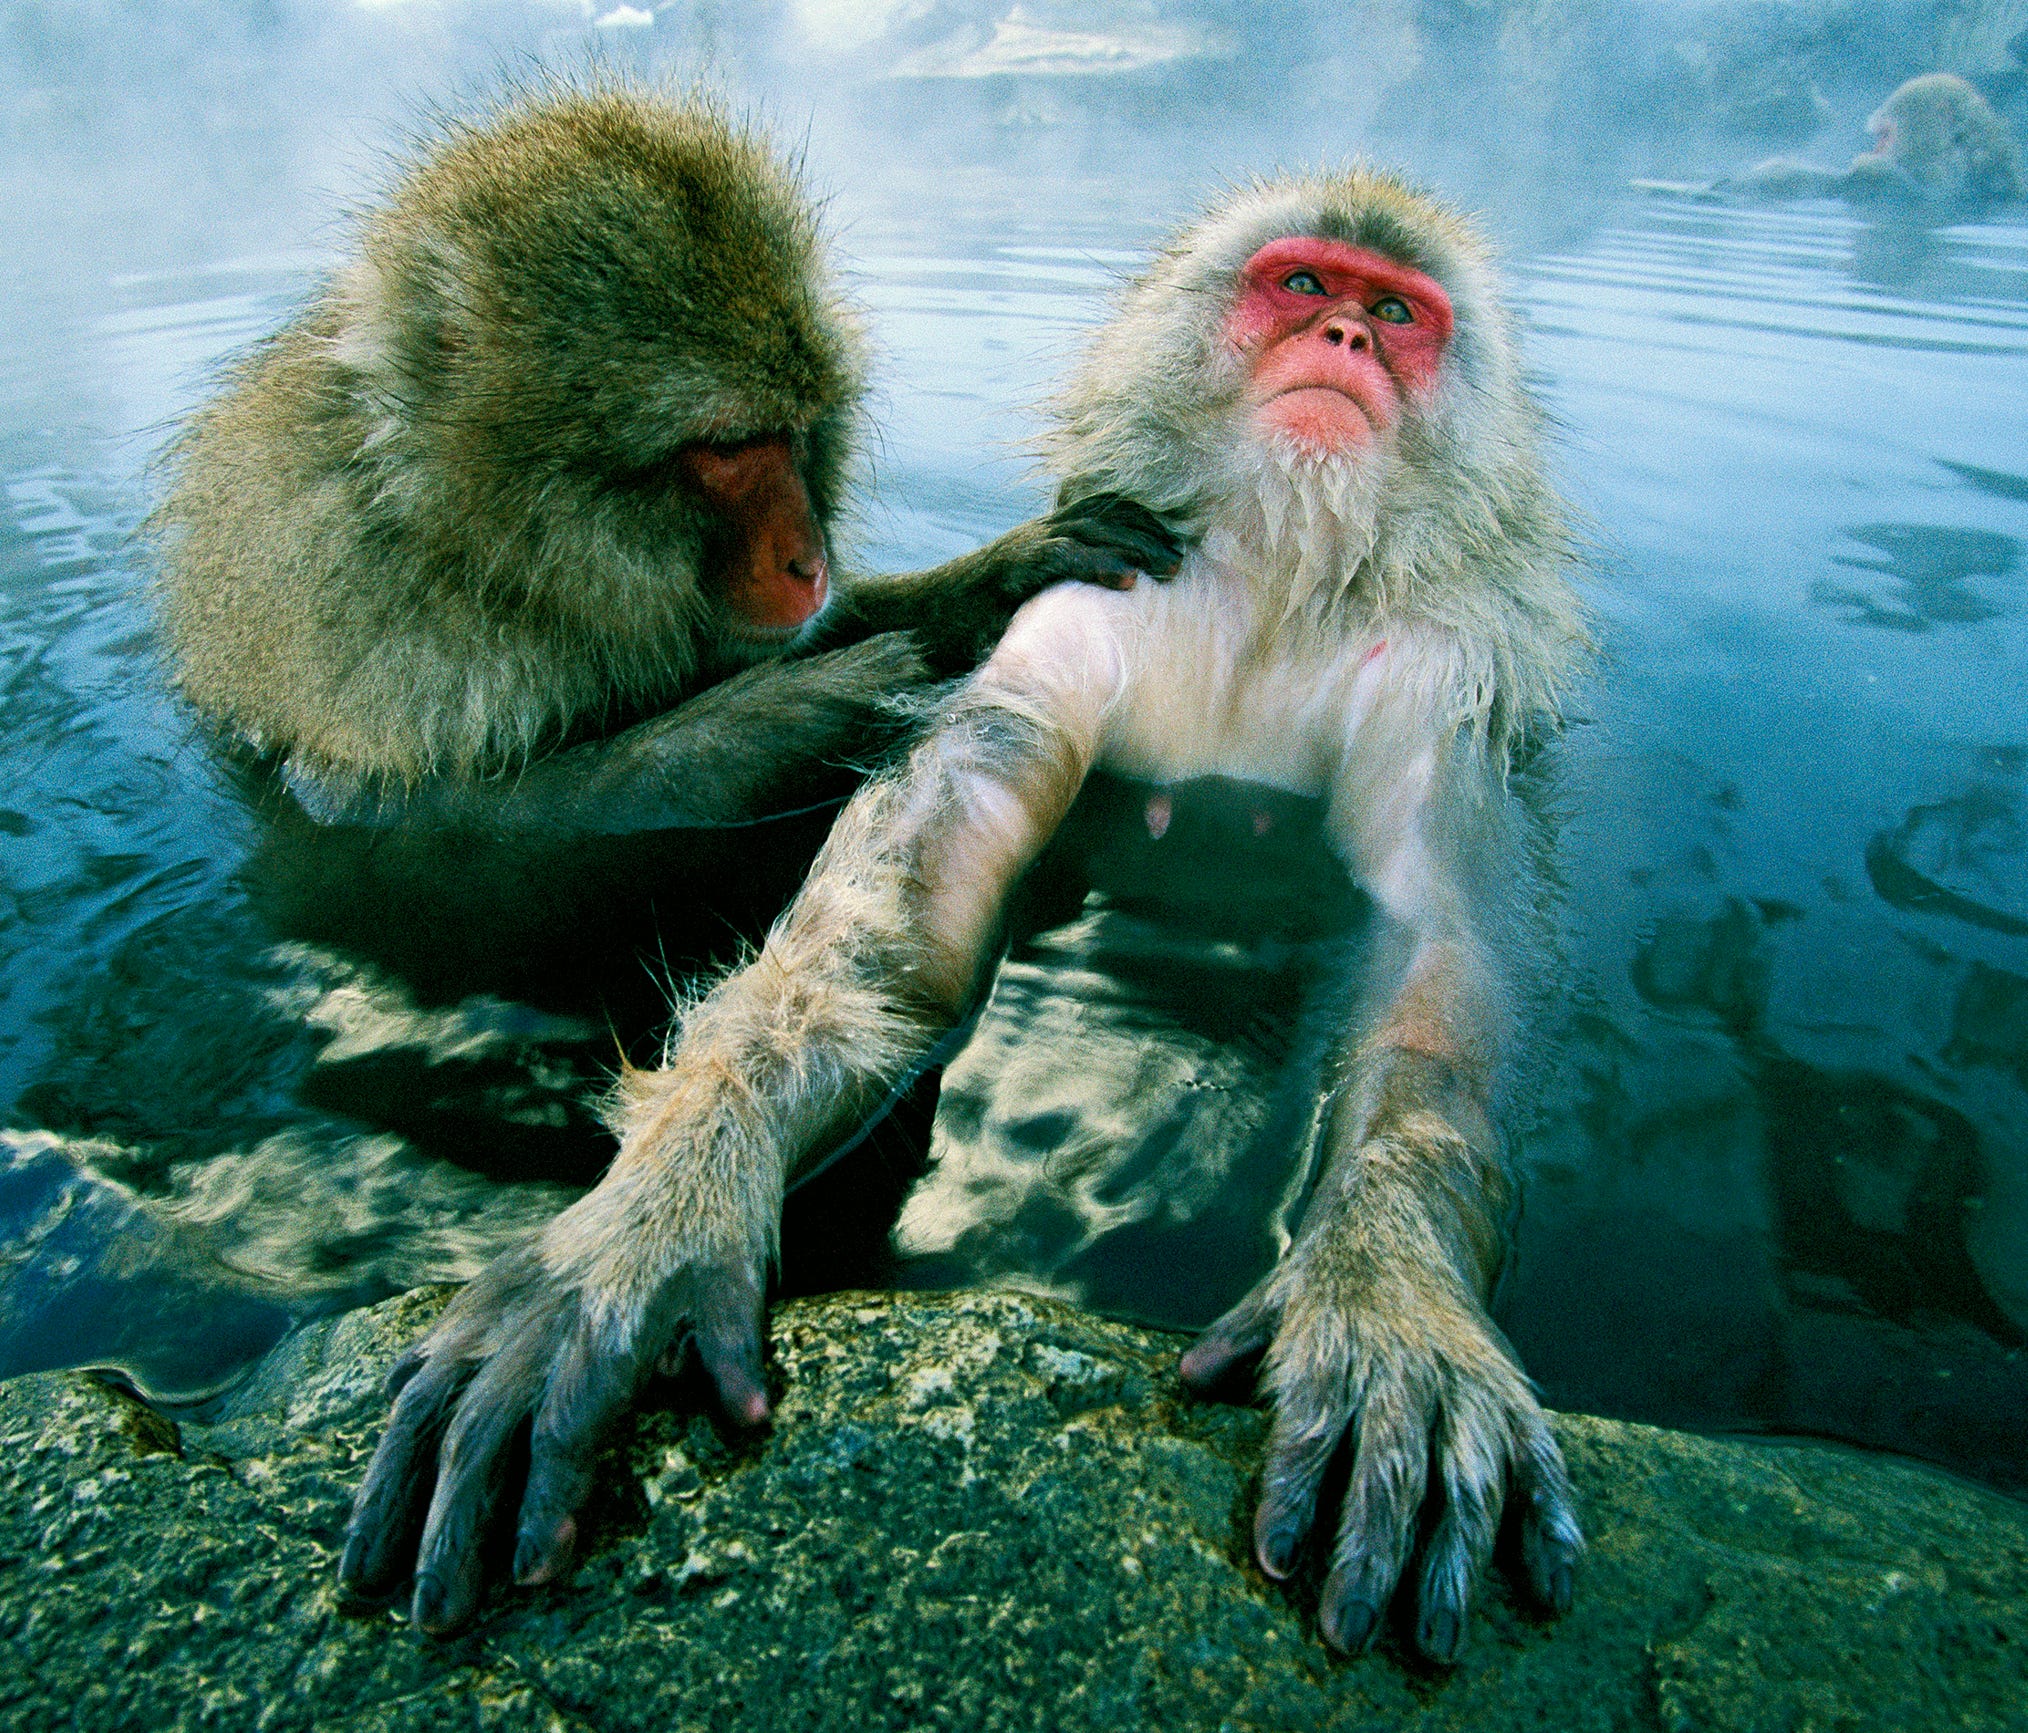 Tim Laman was photographing a story on Japanese wildlife when he saw a very relaxed macaque and his friend in these hot springs. This image is part of the National Geographic Flash Print Sale which runs  from Sept. 9 through Sept. 16, 2017.